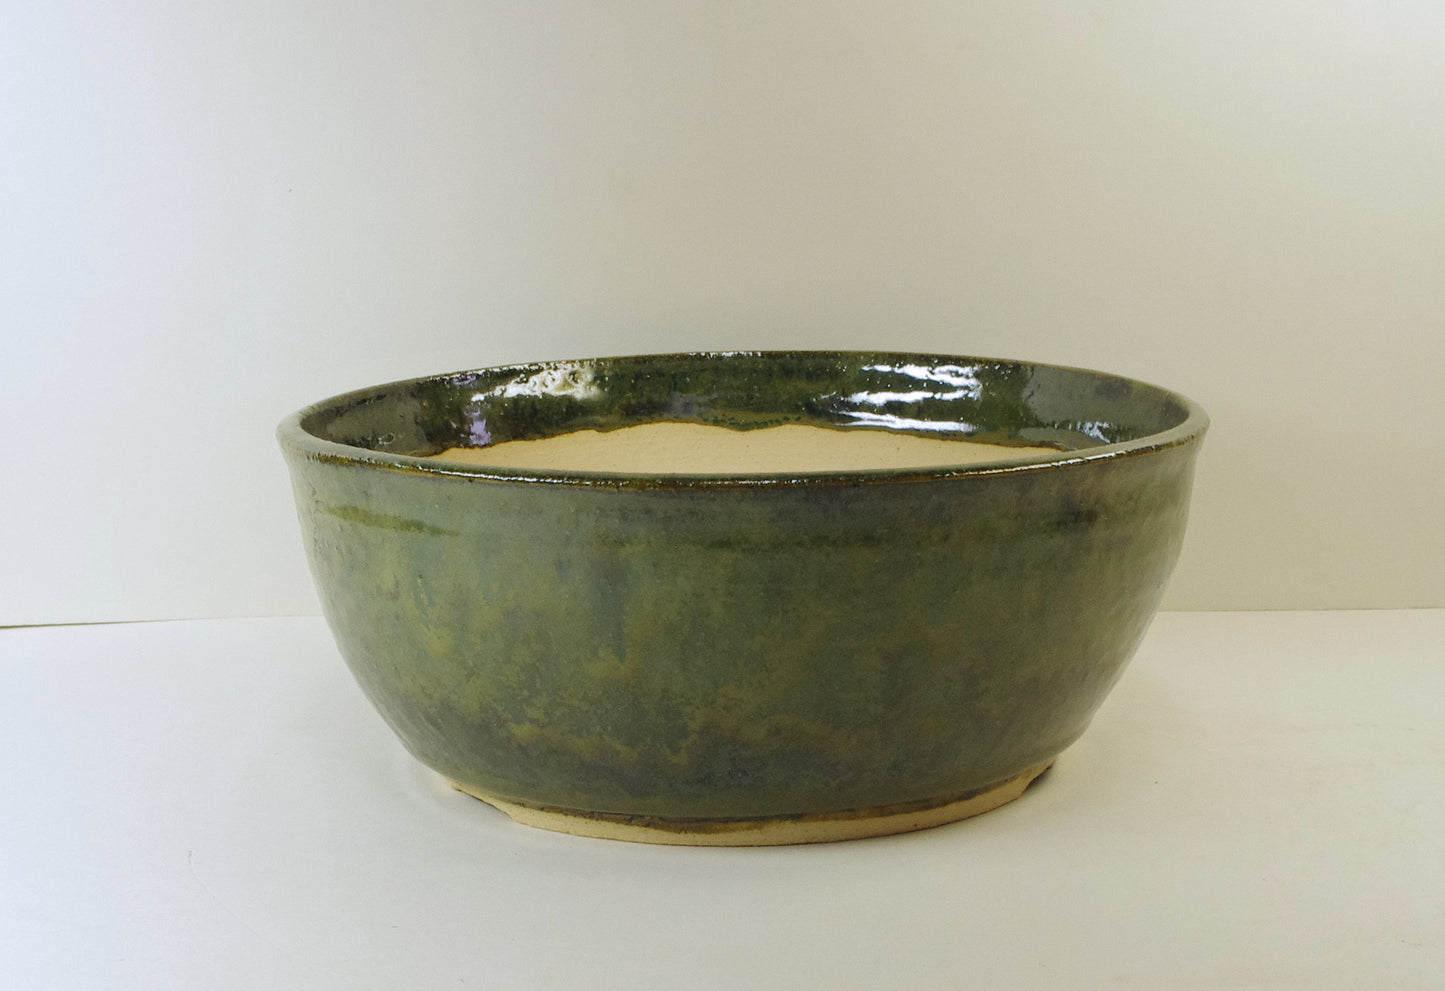 2120, Hand Thrown Stoneware Bonsai Pot,  Greens, 8 1/2 x 3 3/8, With Extra Wire Holes